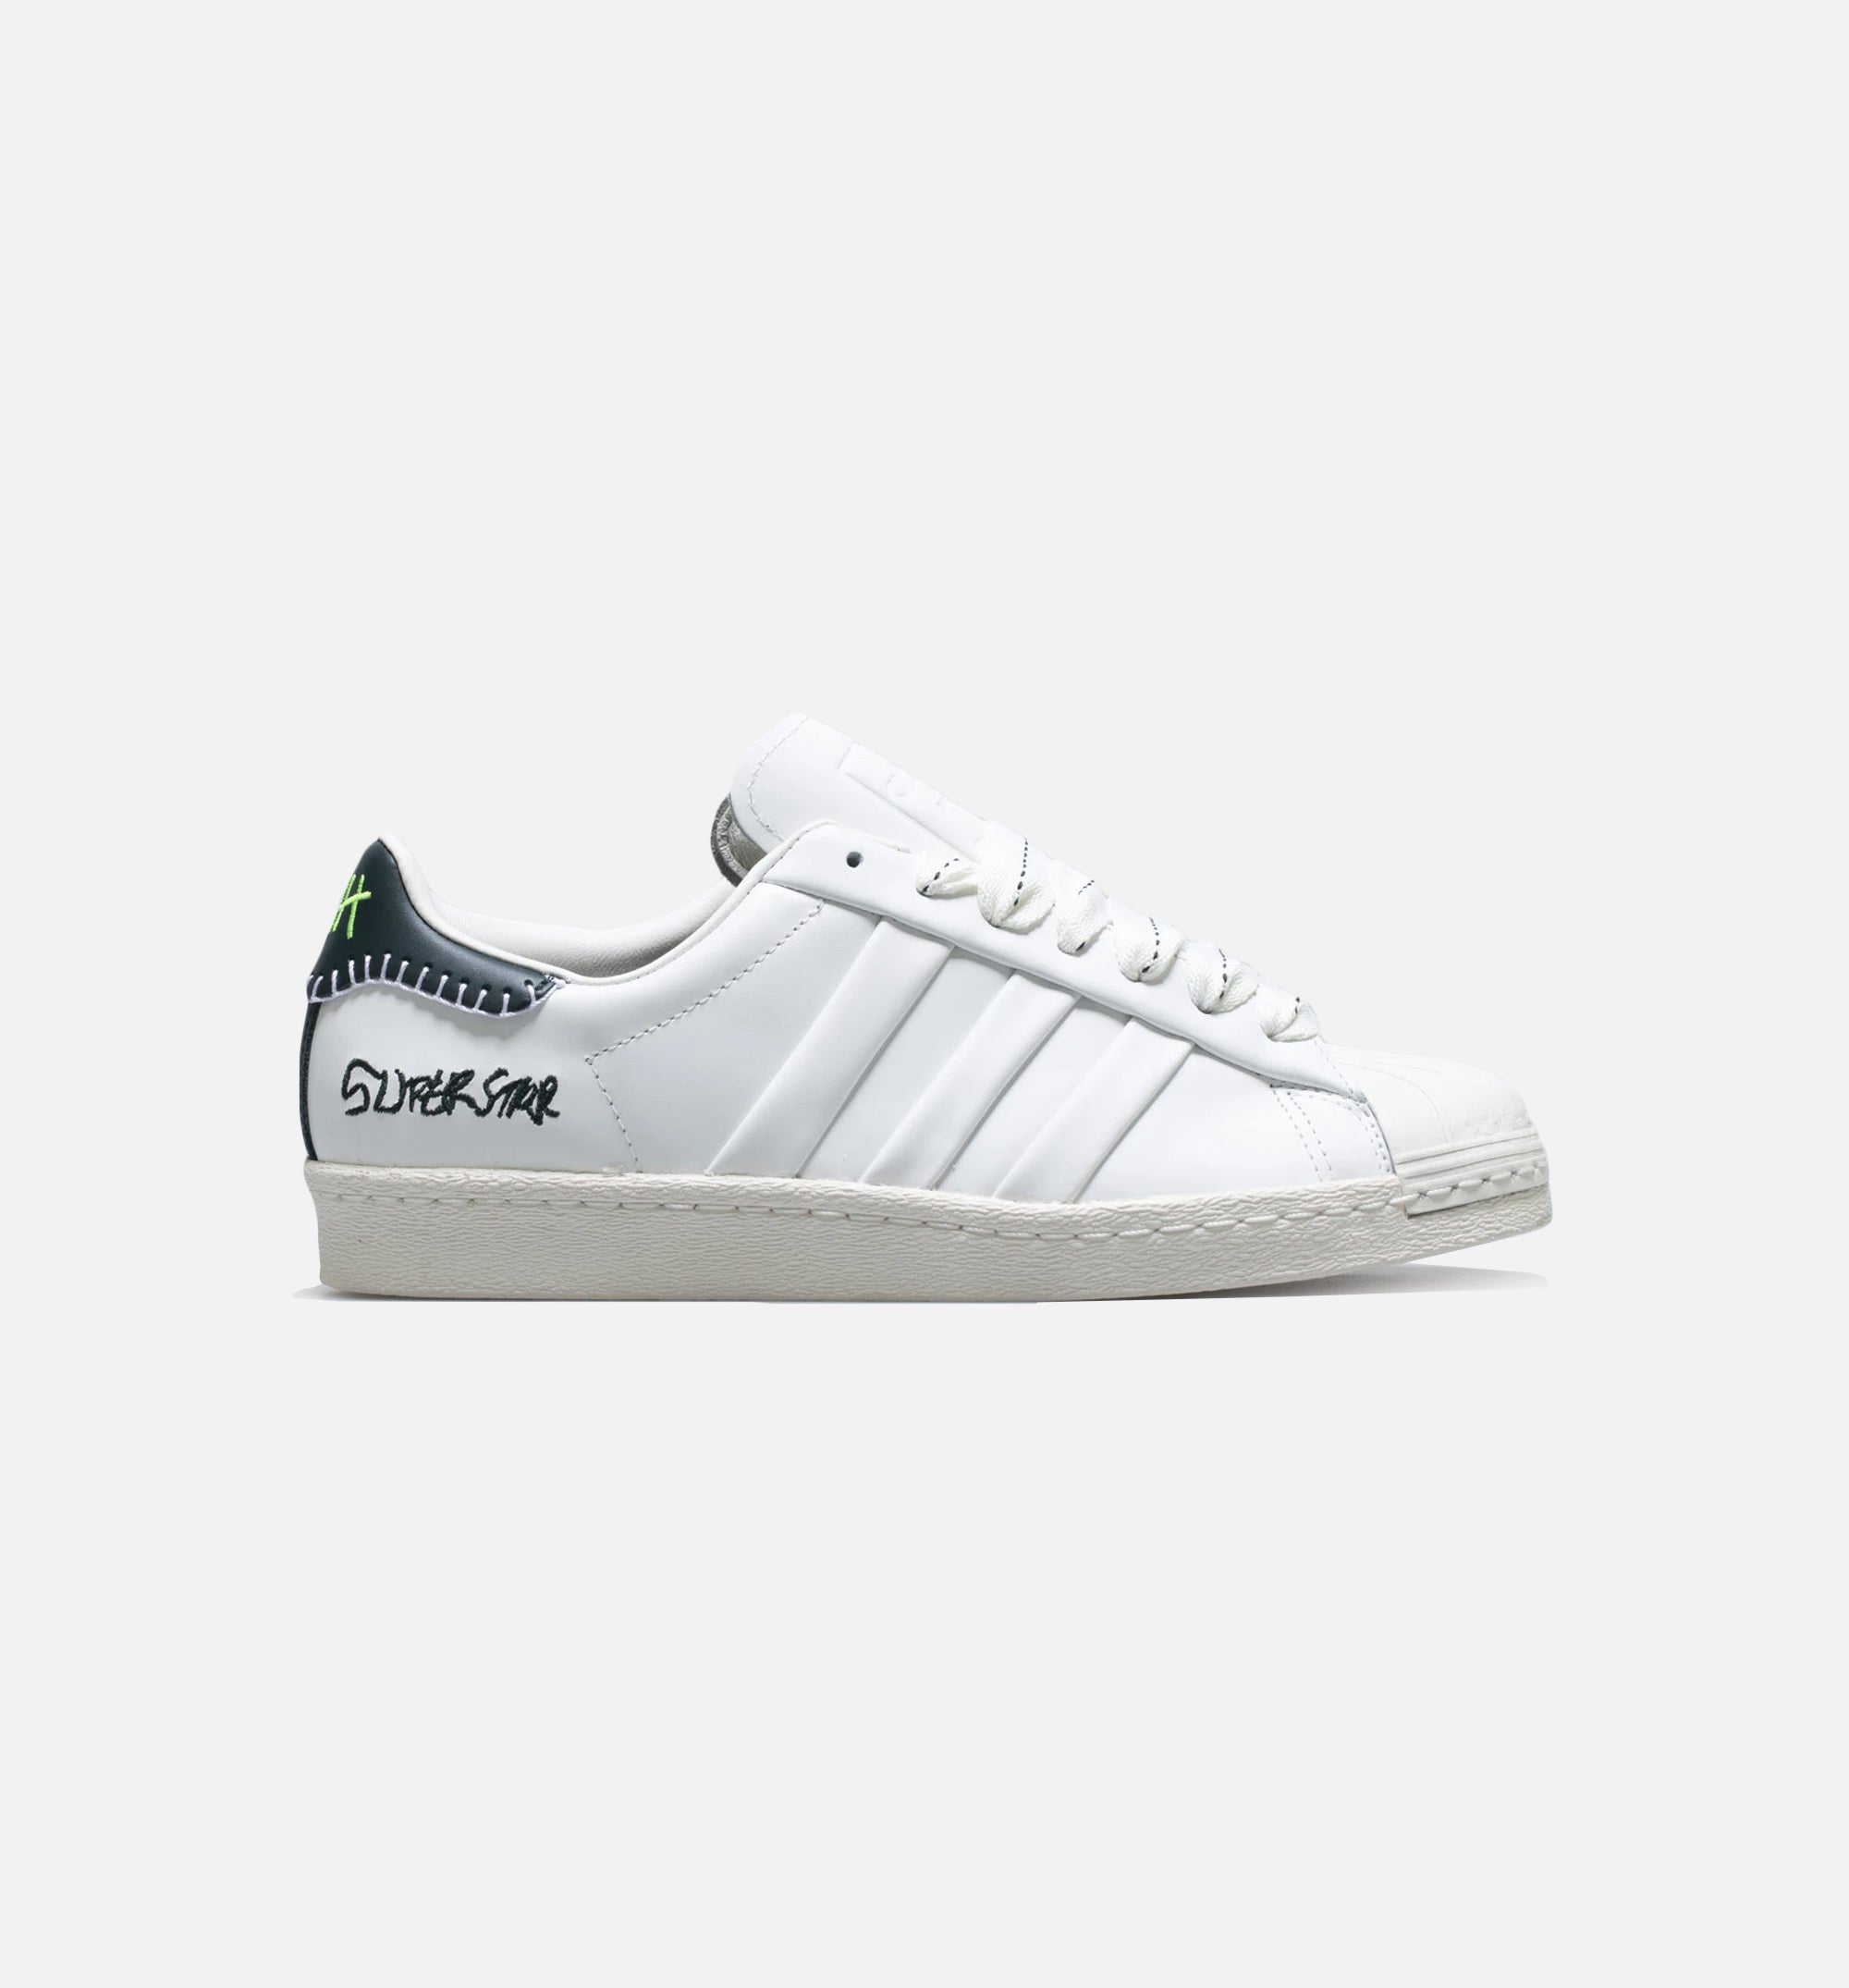 Men's shoes adidas Superstar Xlg Collegiate Green/ Ftw White/ Bold